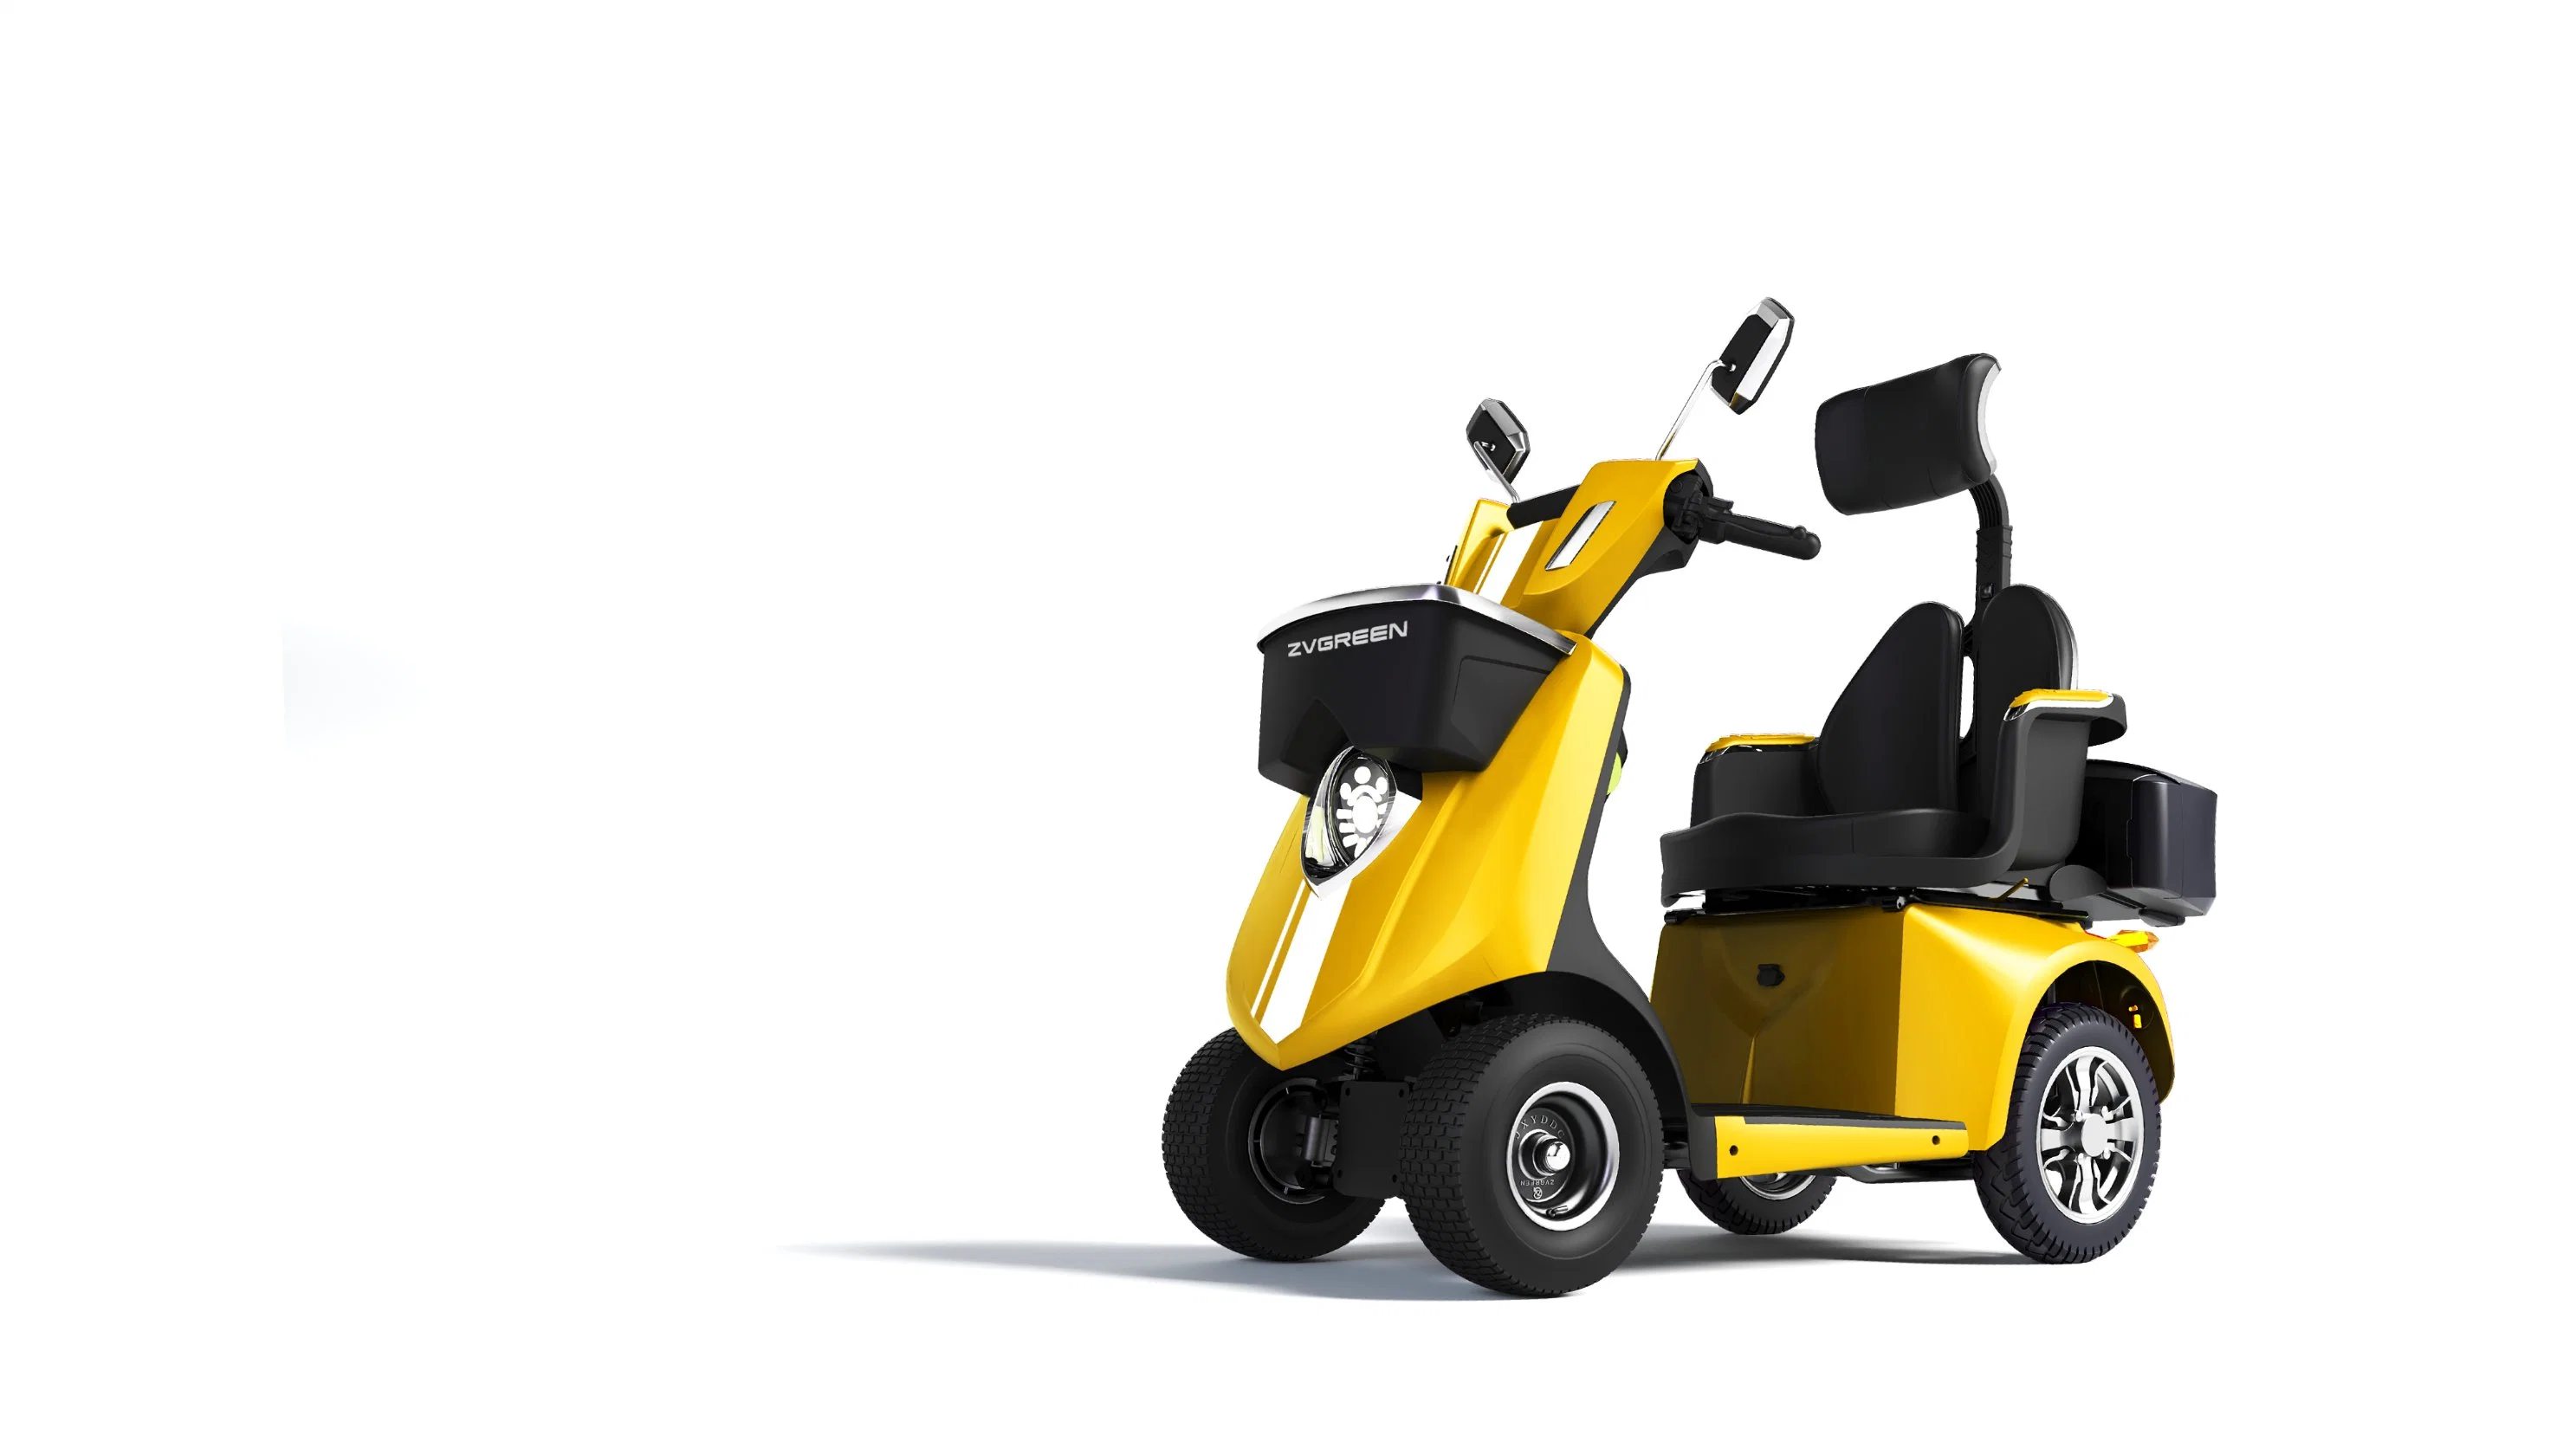 800W Four Wheel for Disabled Electric Mobility Scooter